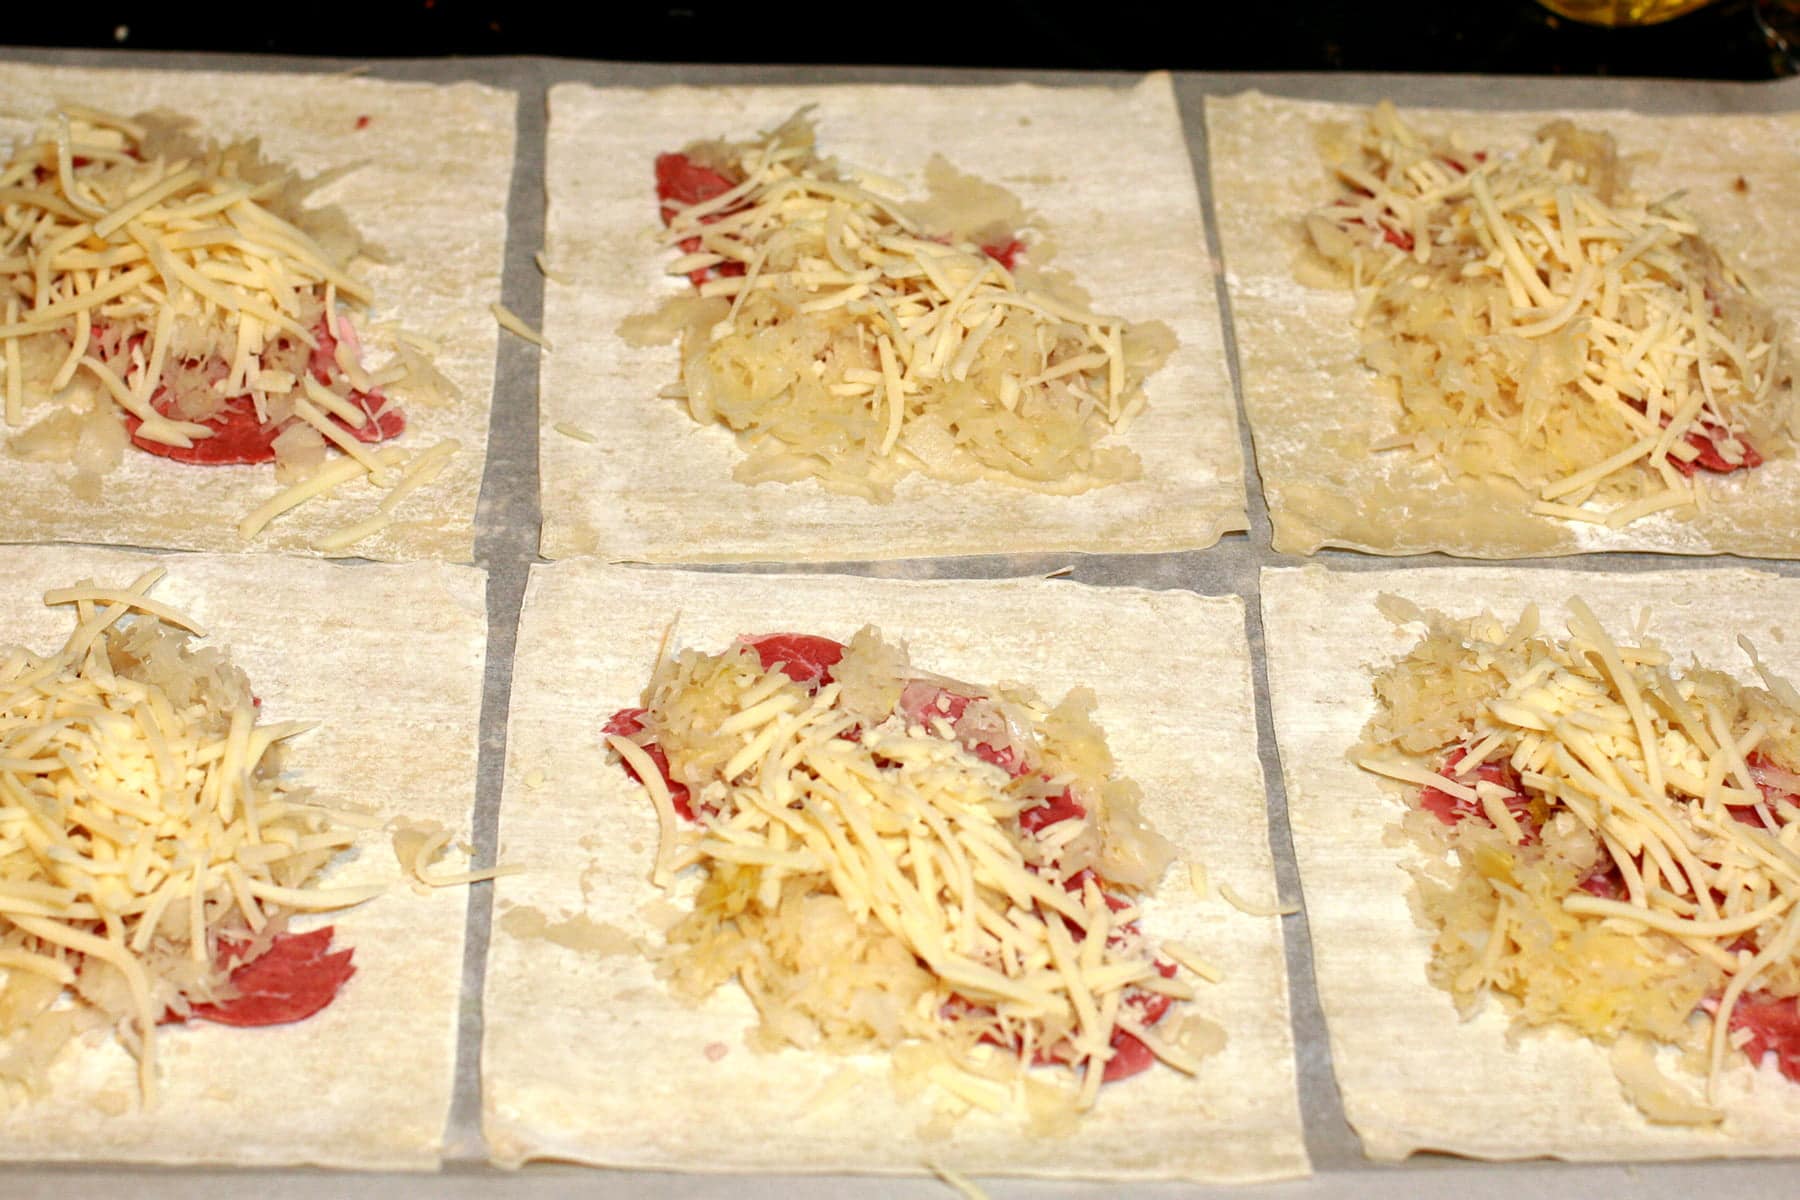 Wonton wrappers are arranged on a work surface. Each has meat, sauerkraut, and swiss cheese on top.